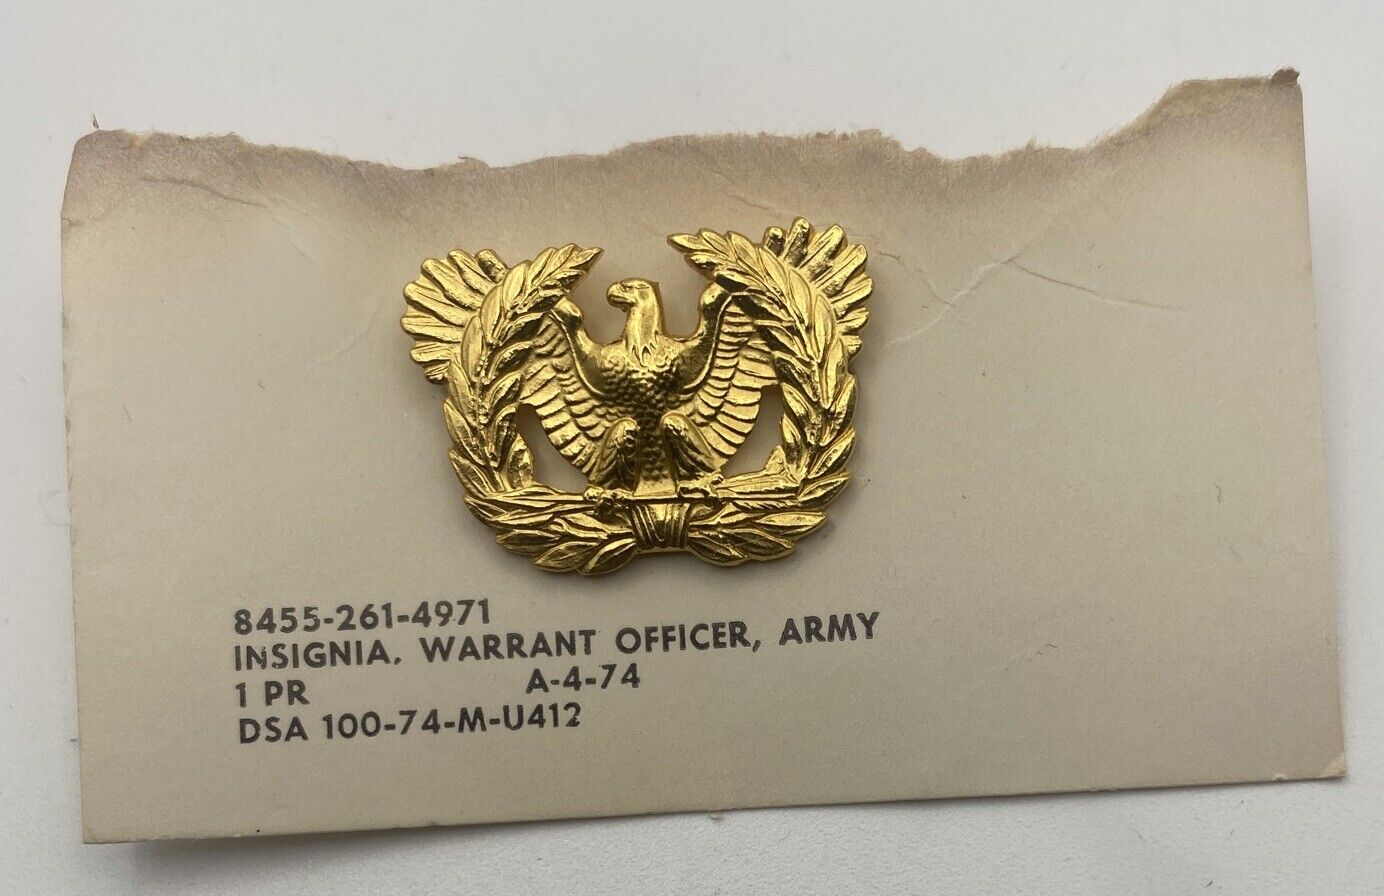 Vintage Gold Tone Warrant Officer Eagle Insignia Uniform or Hat pin